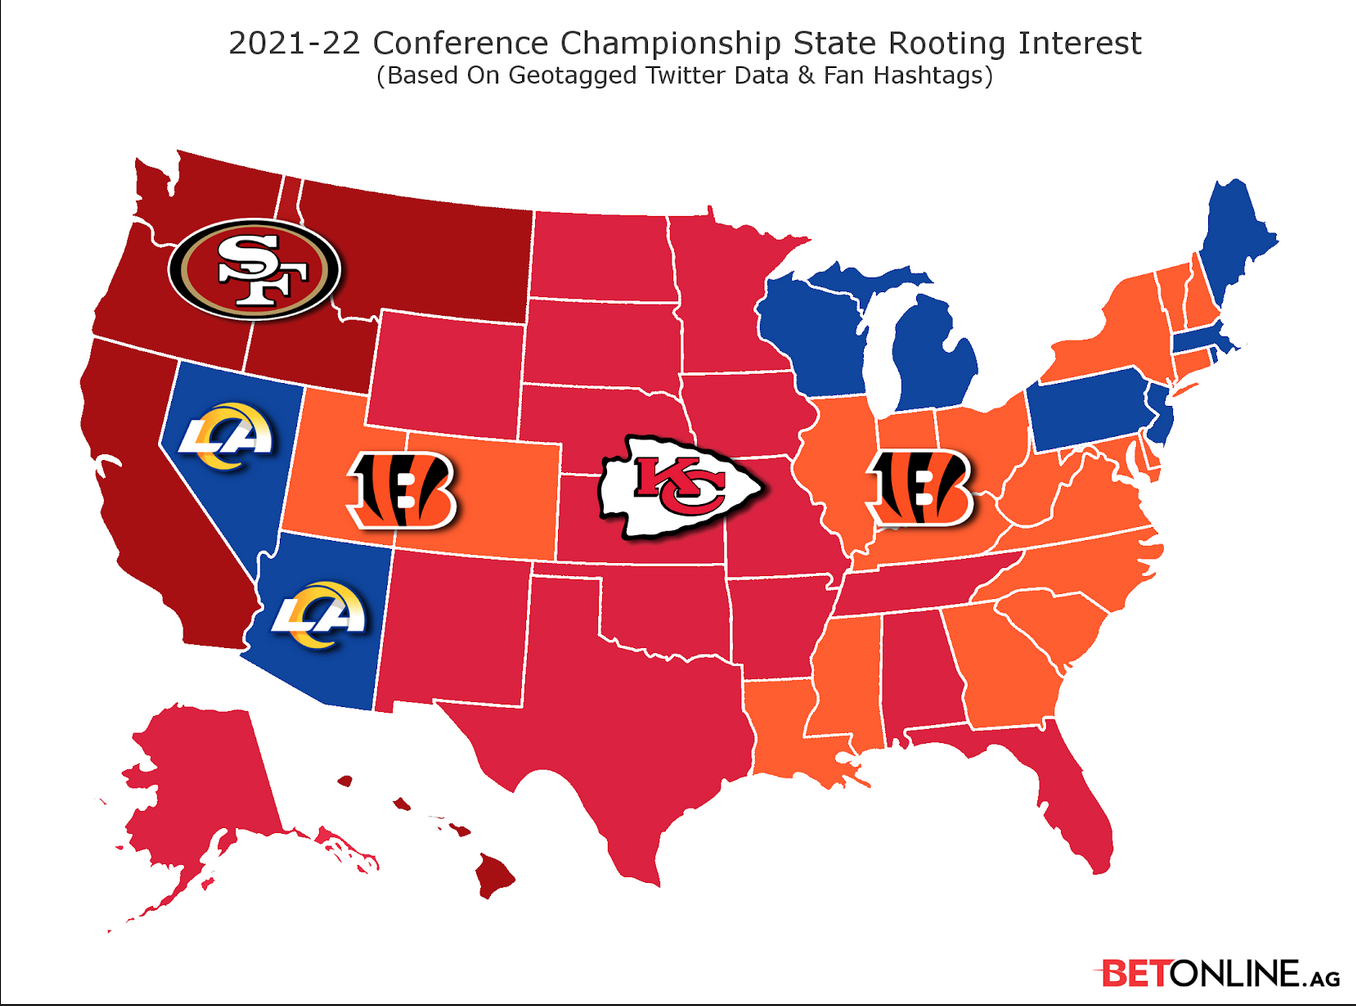 Conference Championship Map Shows Who Each State Fans Are Rooting For